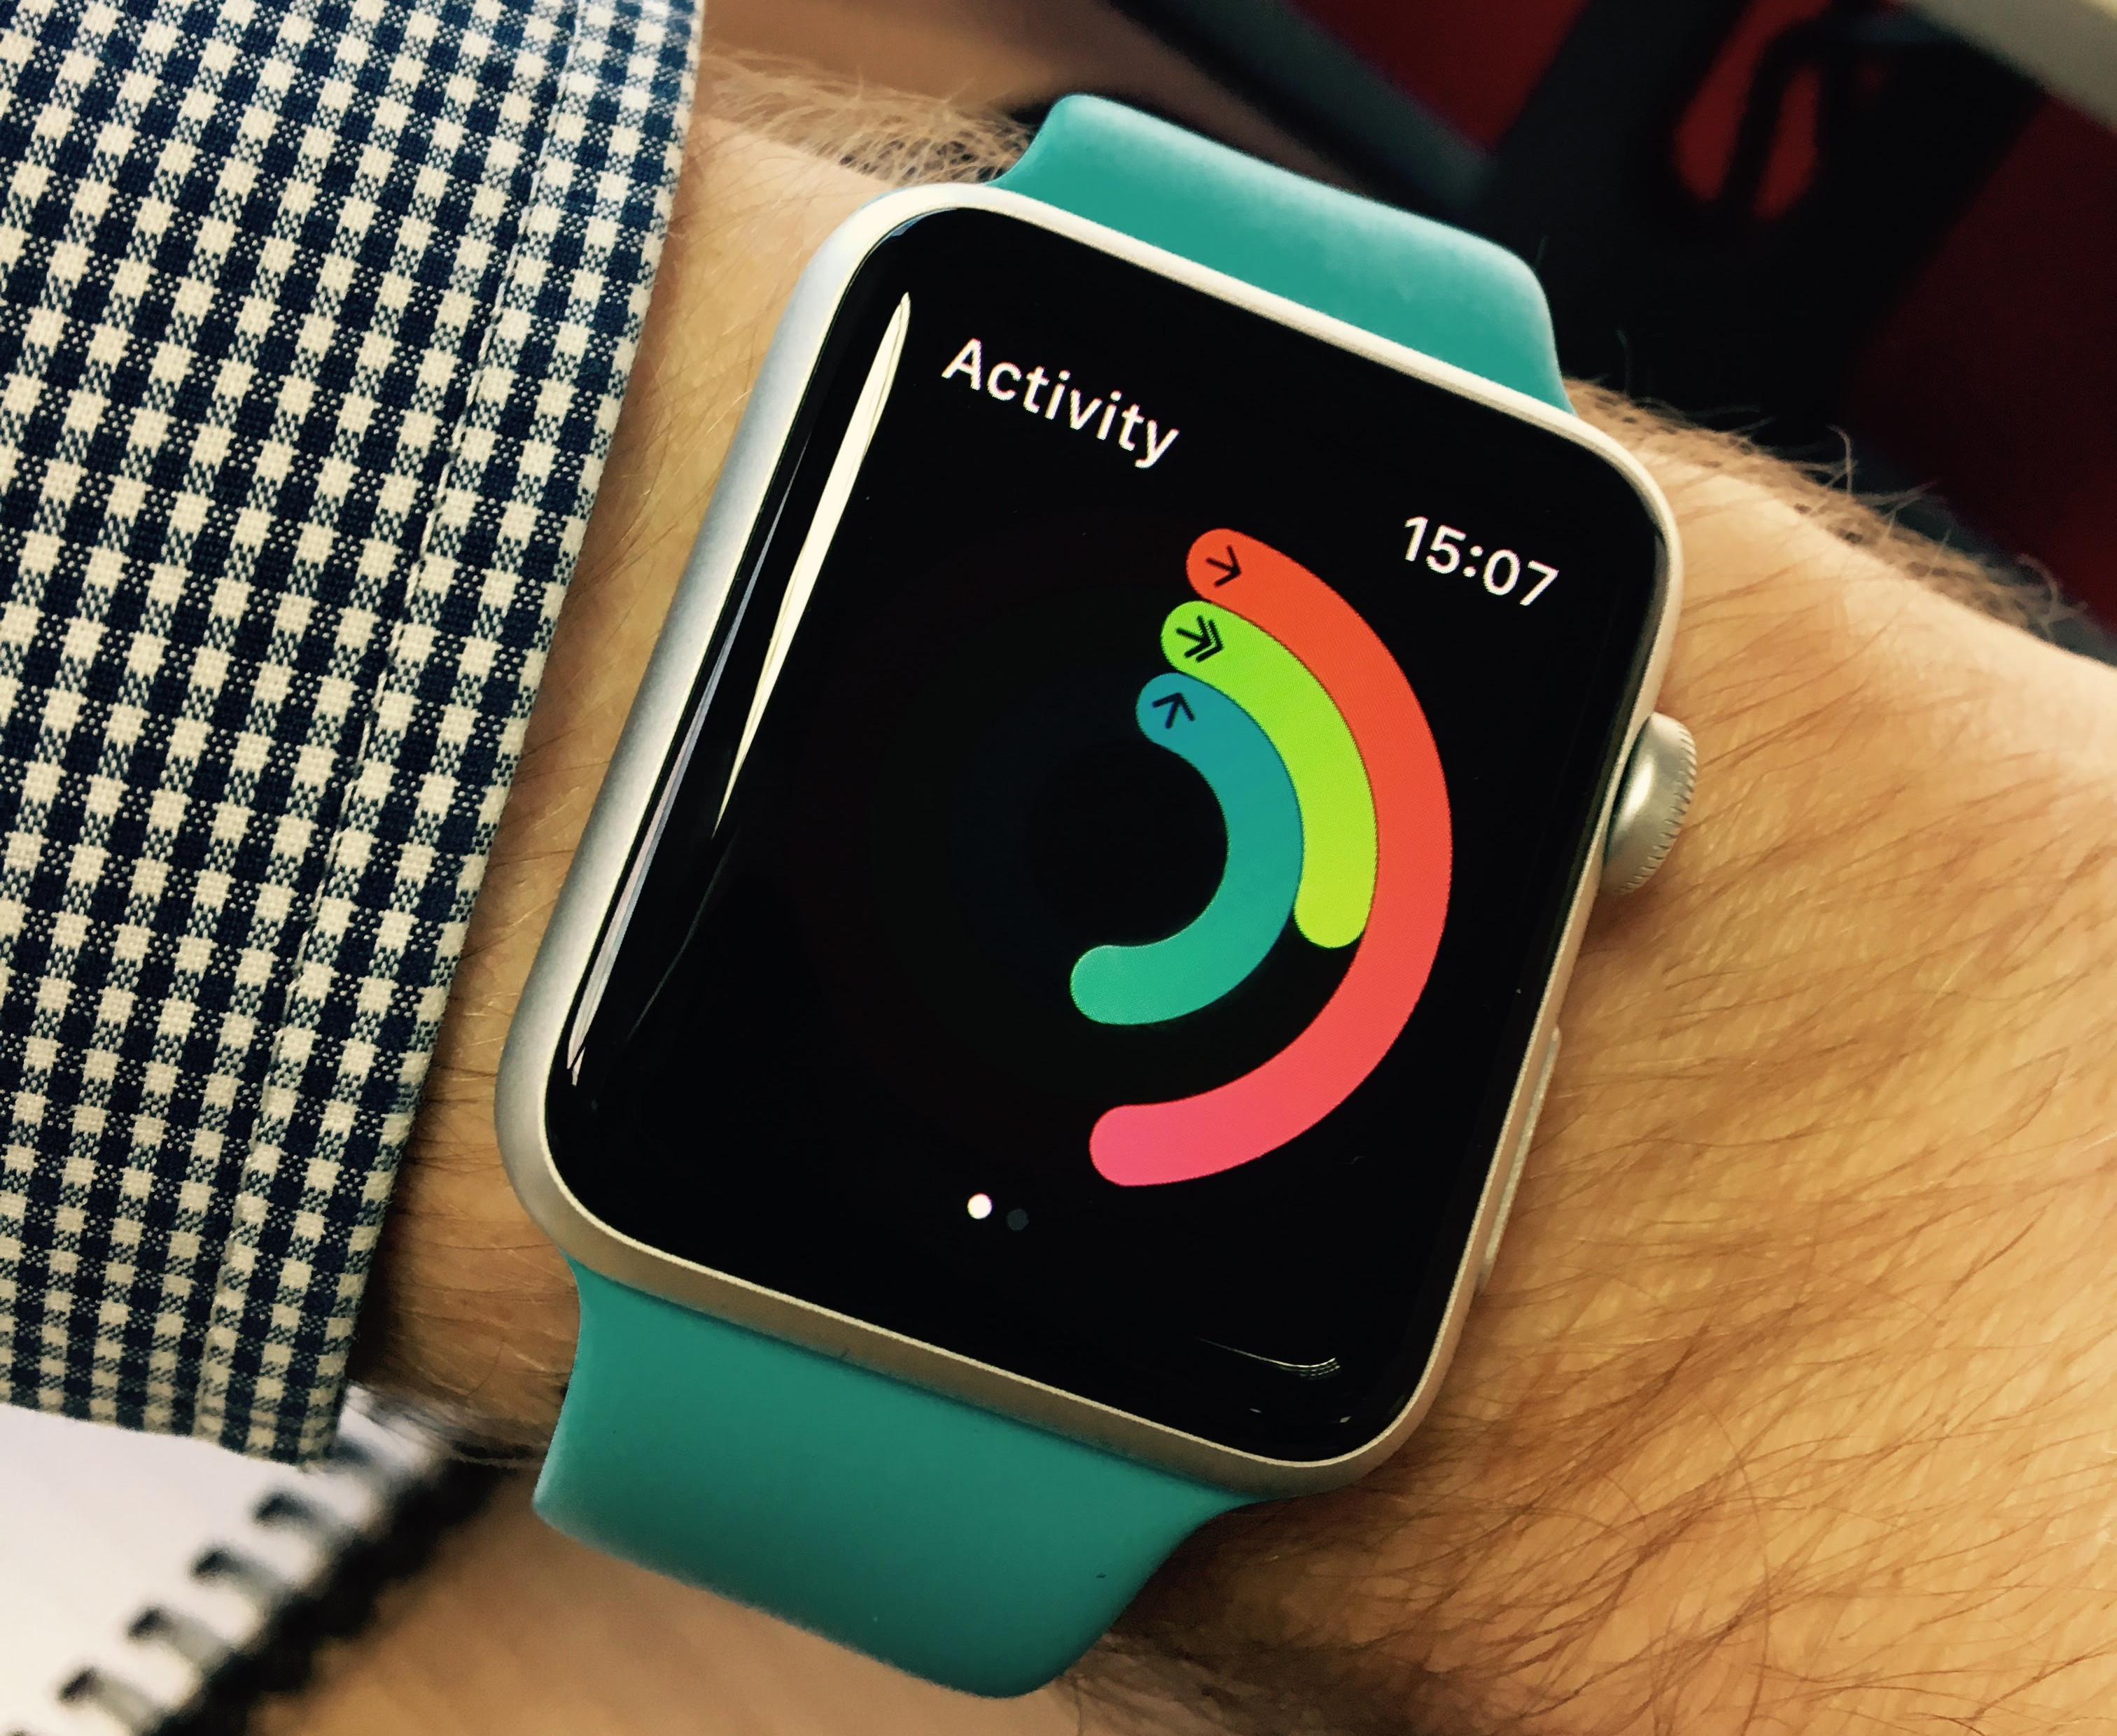 Photo of an Apple IWatch, showing the fitness tracker screen